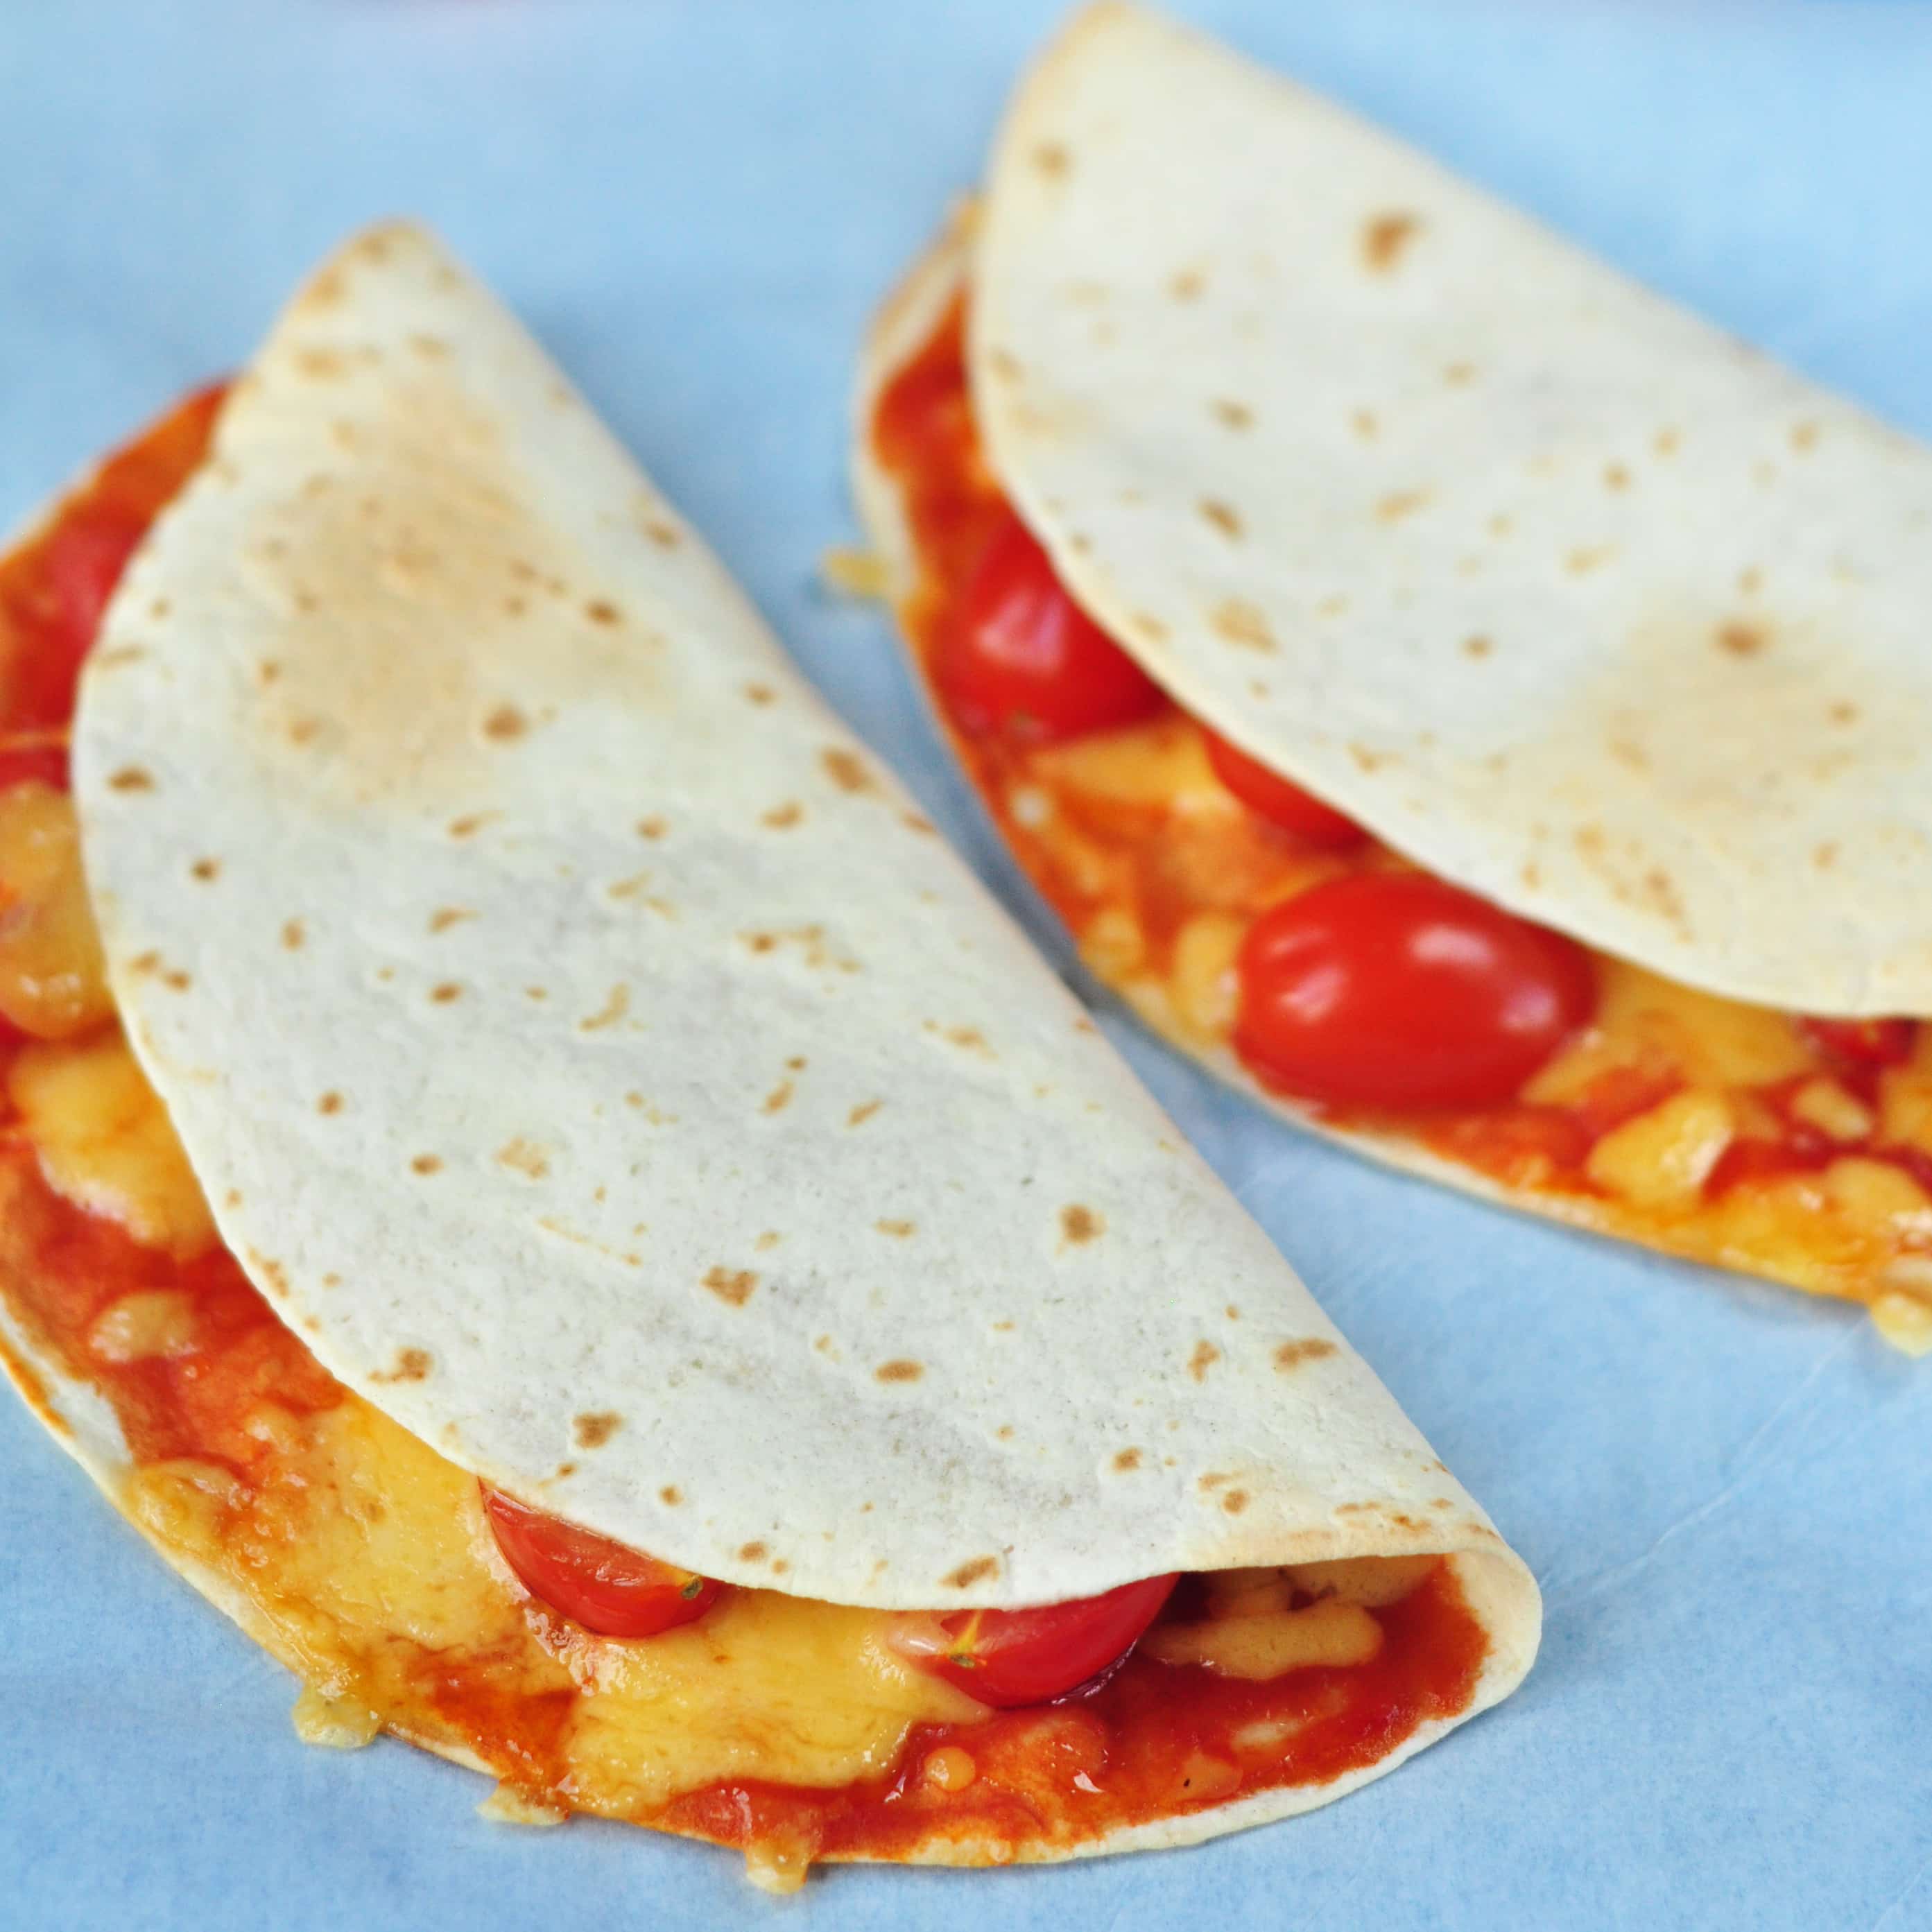 Easy Cheesy Pizza Tortilla – Baby Led Weaning Recipes by Natalie Peall